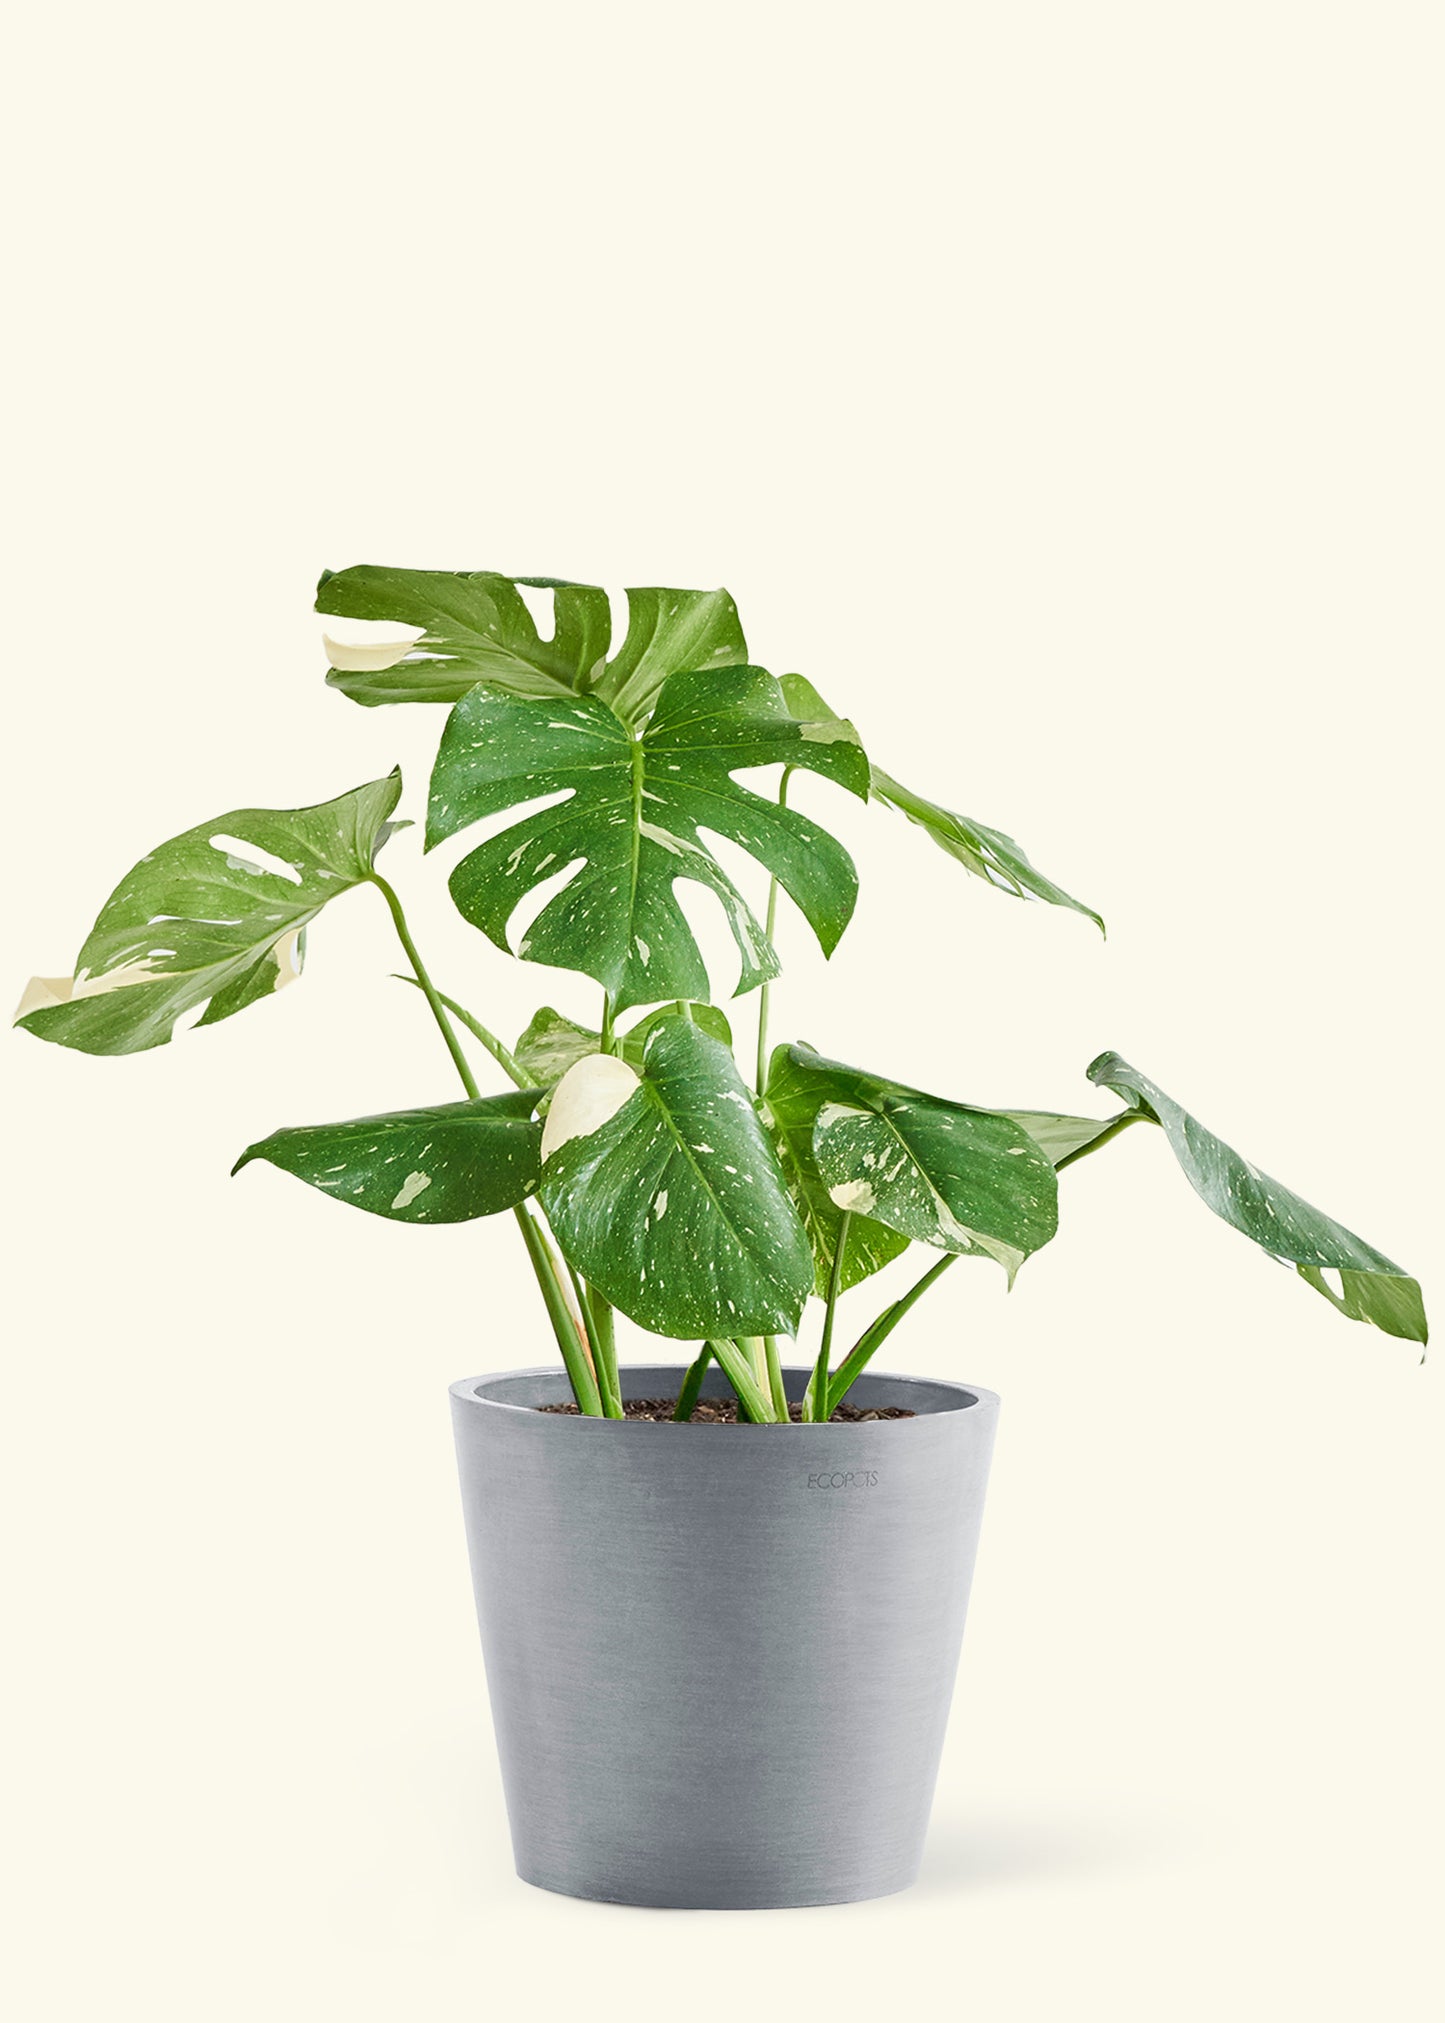 Large Monstera ‘Thai Constellation’ Plant in a gray stone pot.